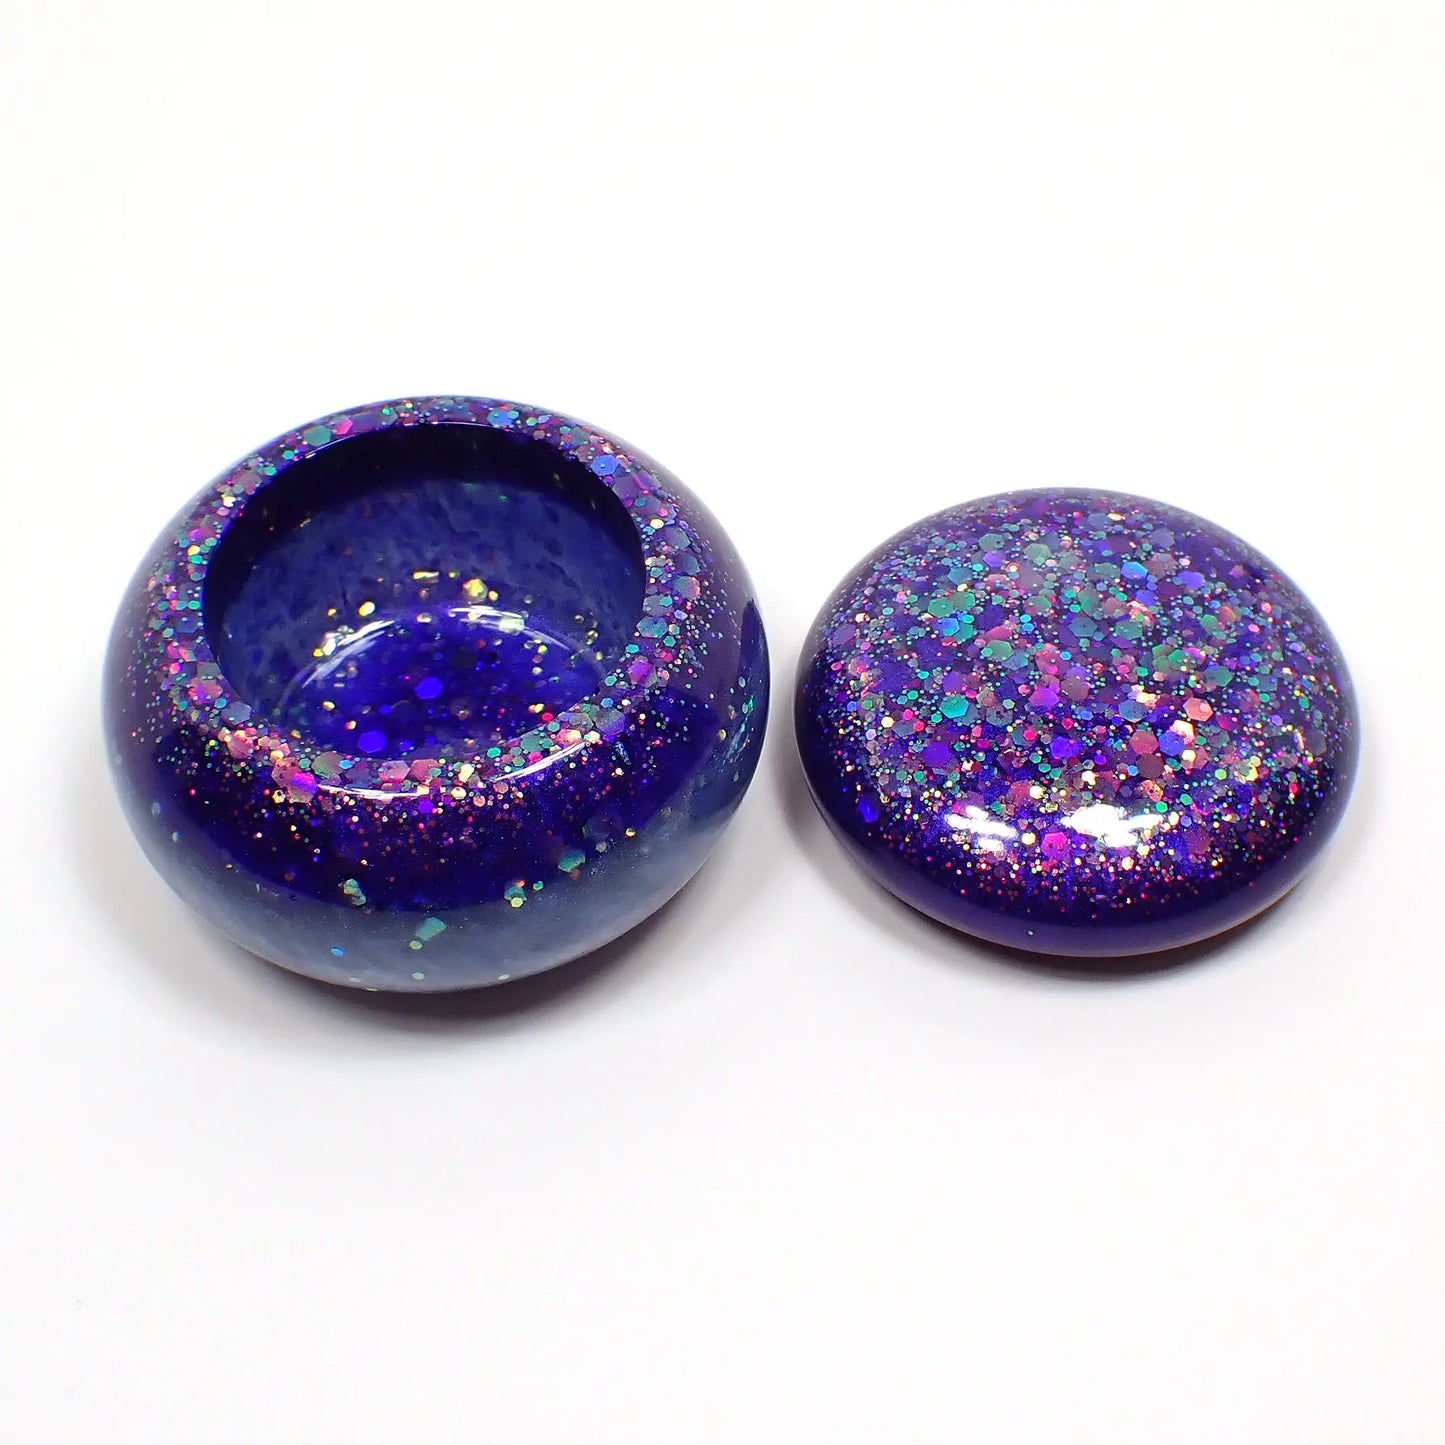 Small Pearly Blue Round Handmade Resin Trinket Box with Purple Chunky Iridescent Glitter